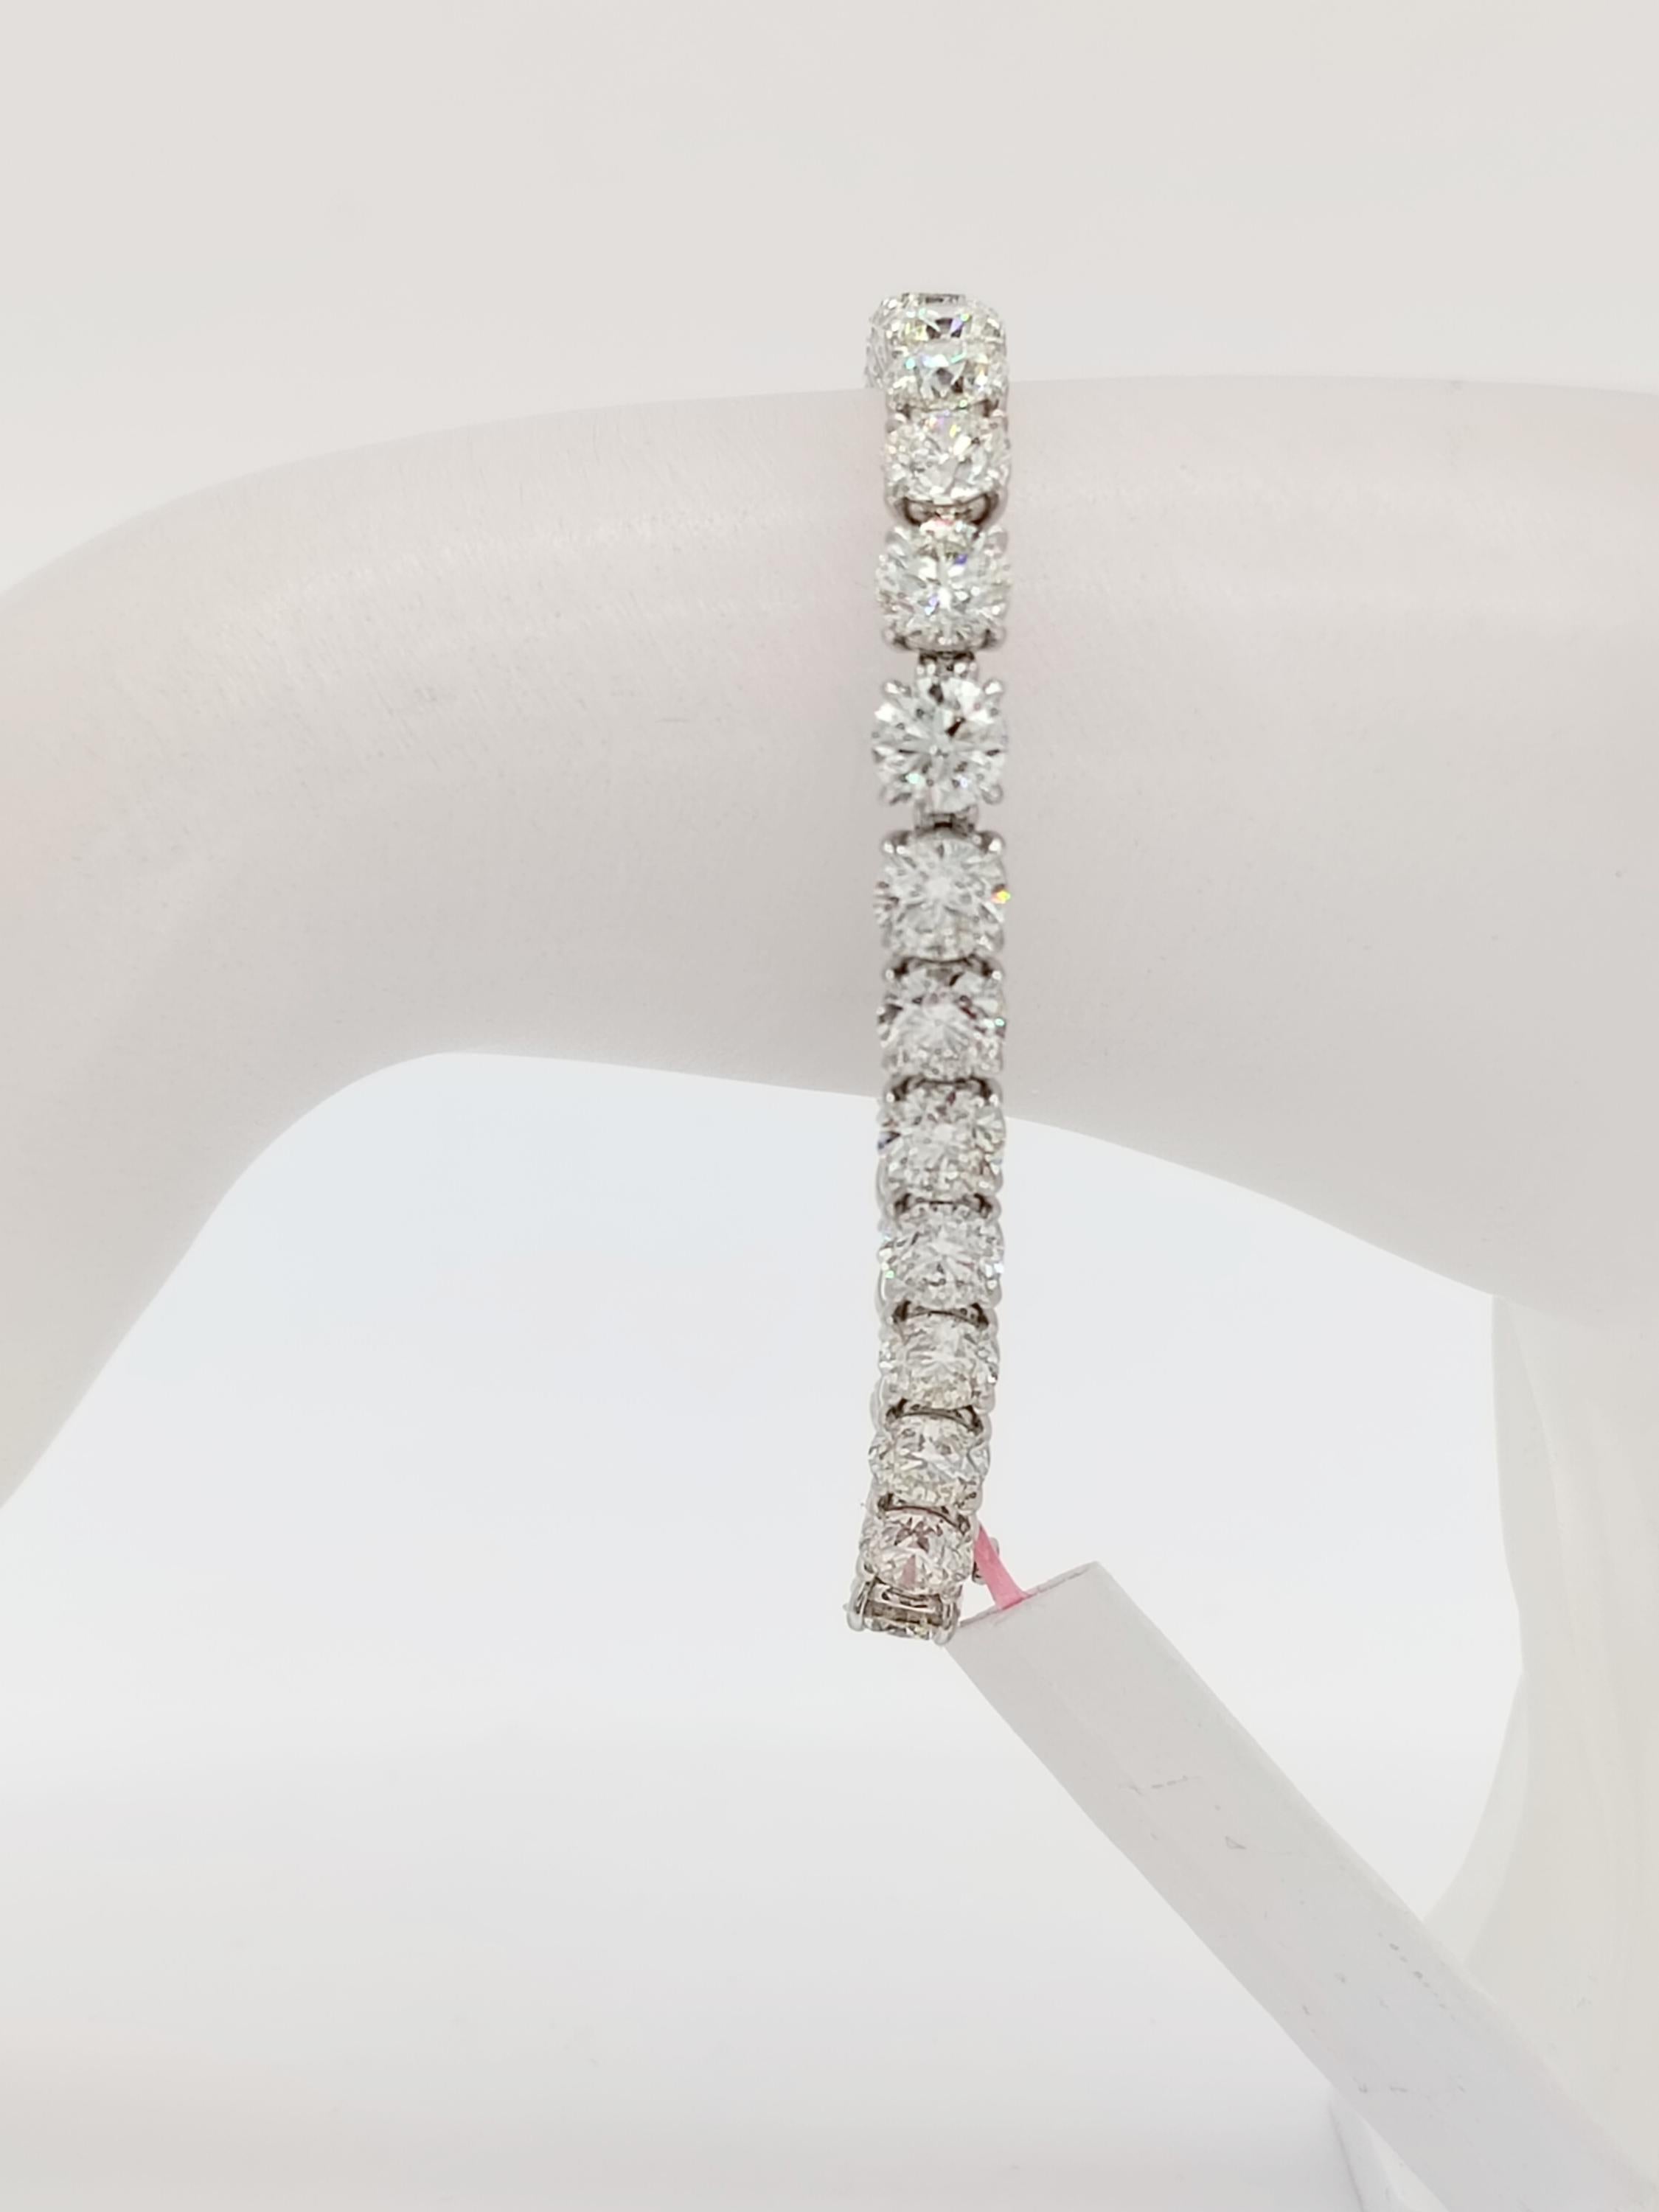 Gorgeous 18.11 ct.  HIJ  VS-SI white diamond rounds.  Each stone is 0.60 ct.  Handmade in 18k white gold.  Length is 6.75